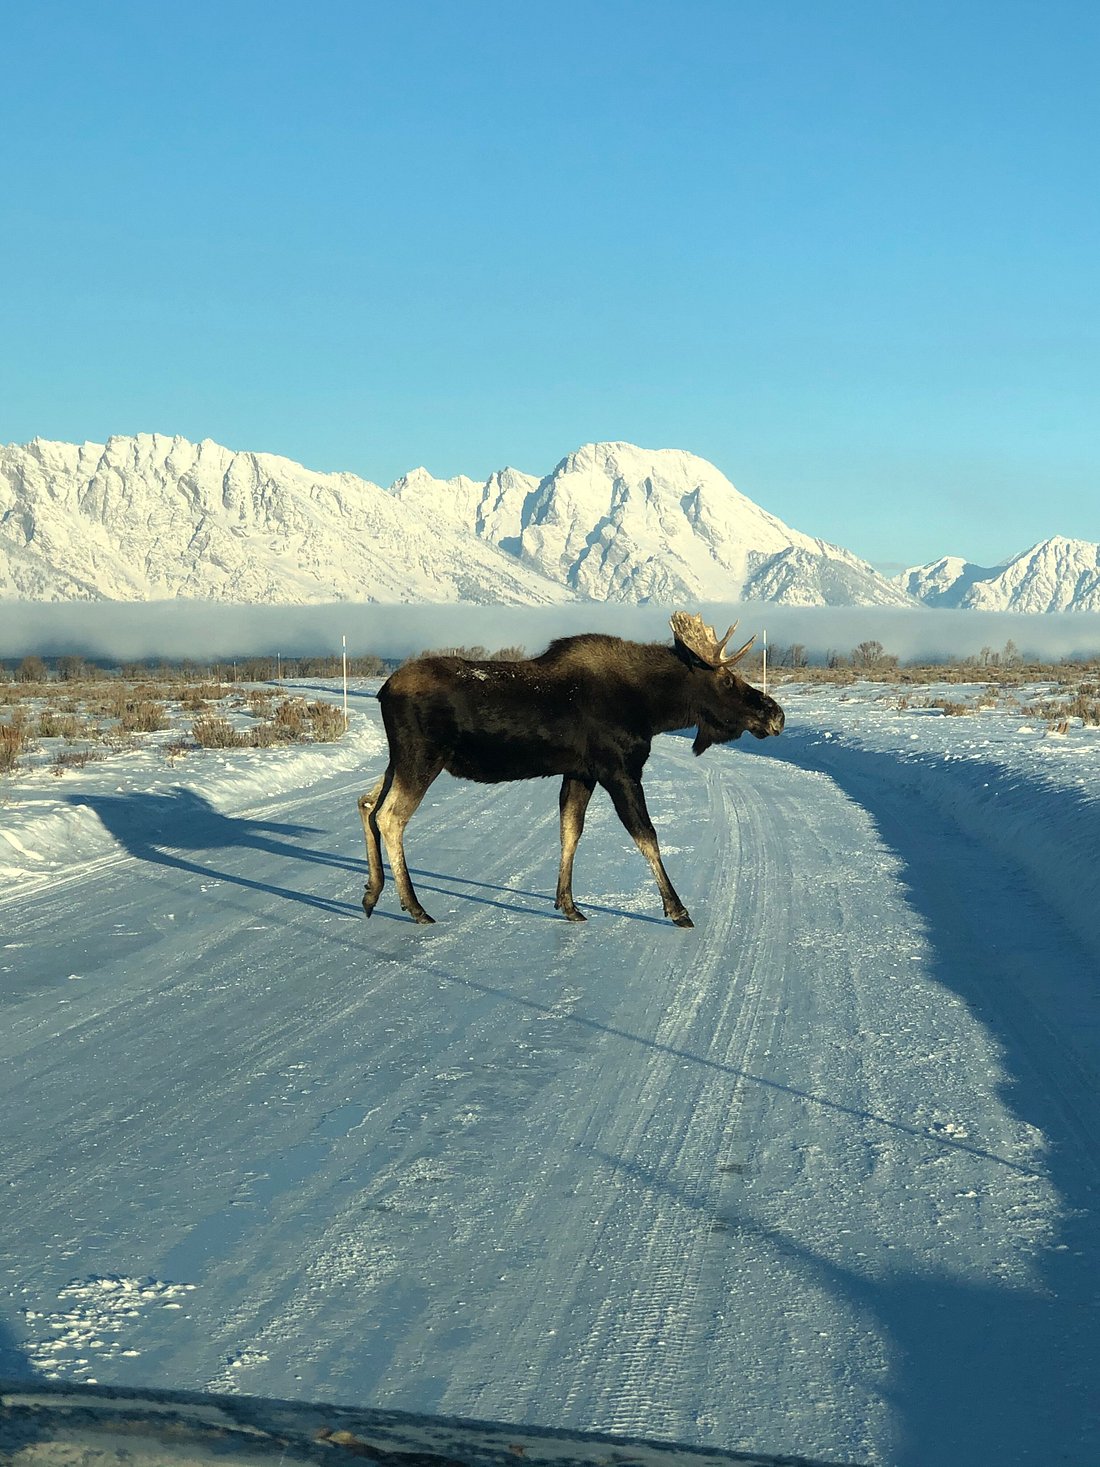 moose crossing road in winter time in Jackson Hole